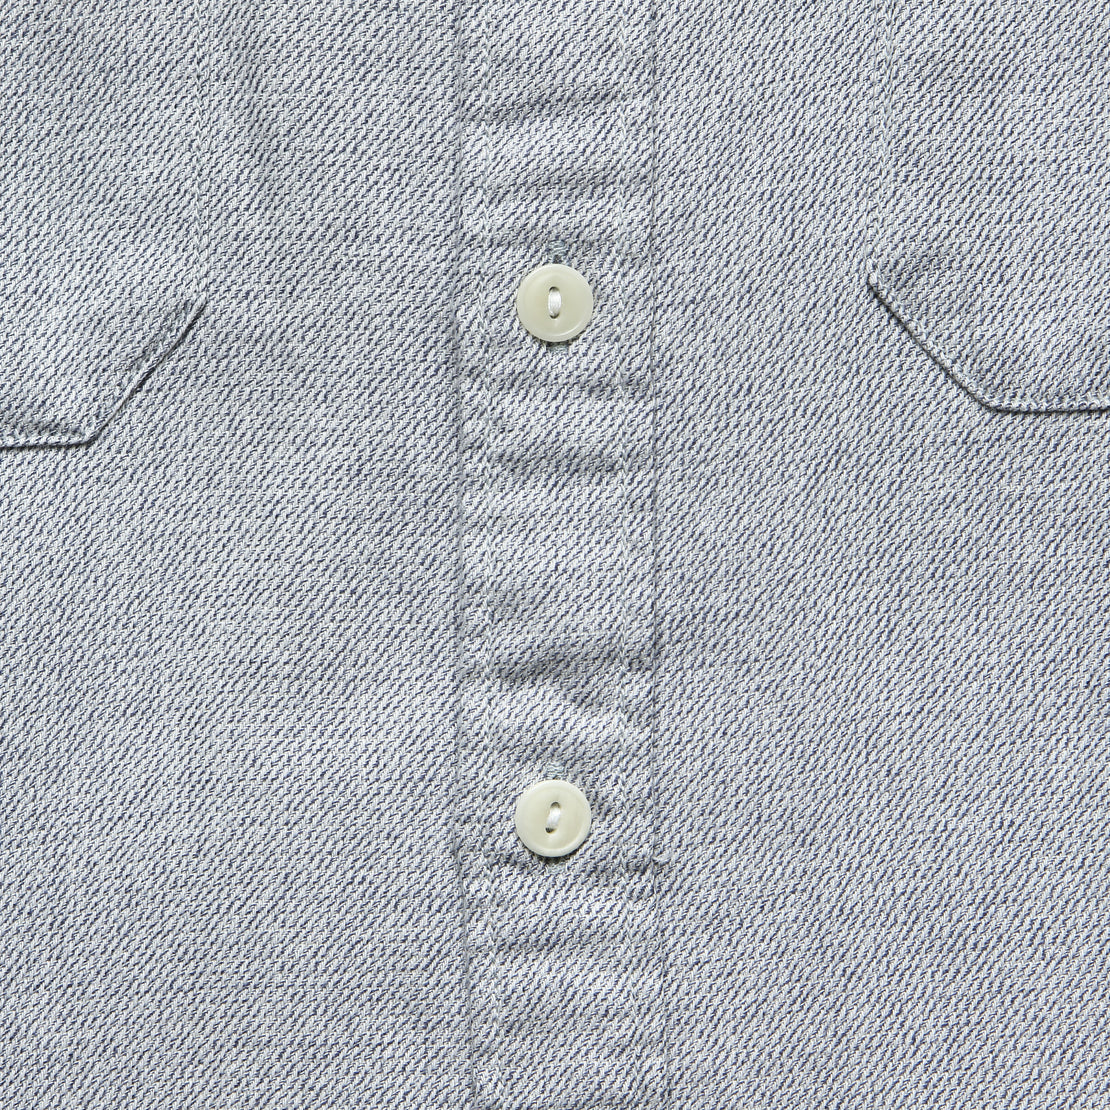 Jackson Worker Shirt - Grizzly Graphite